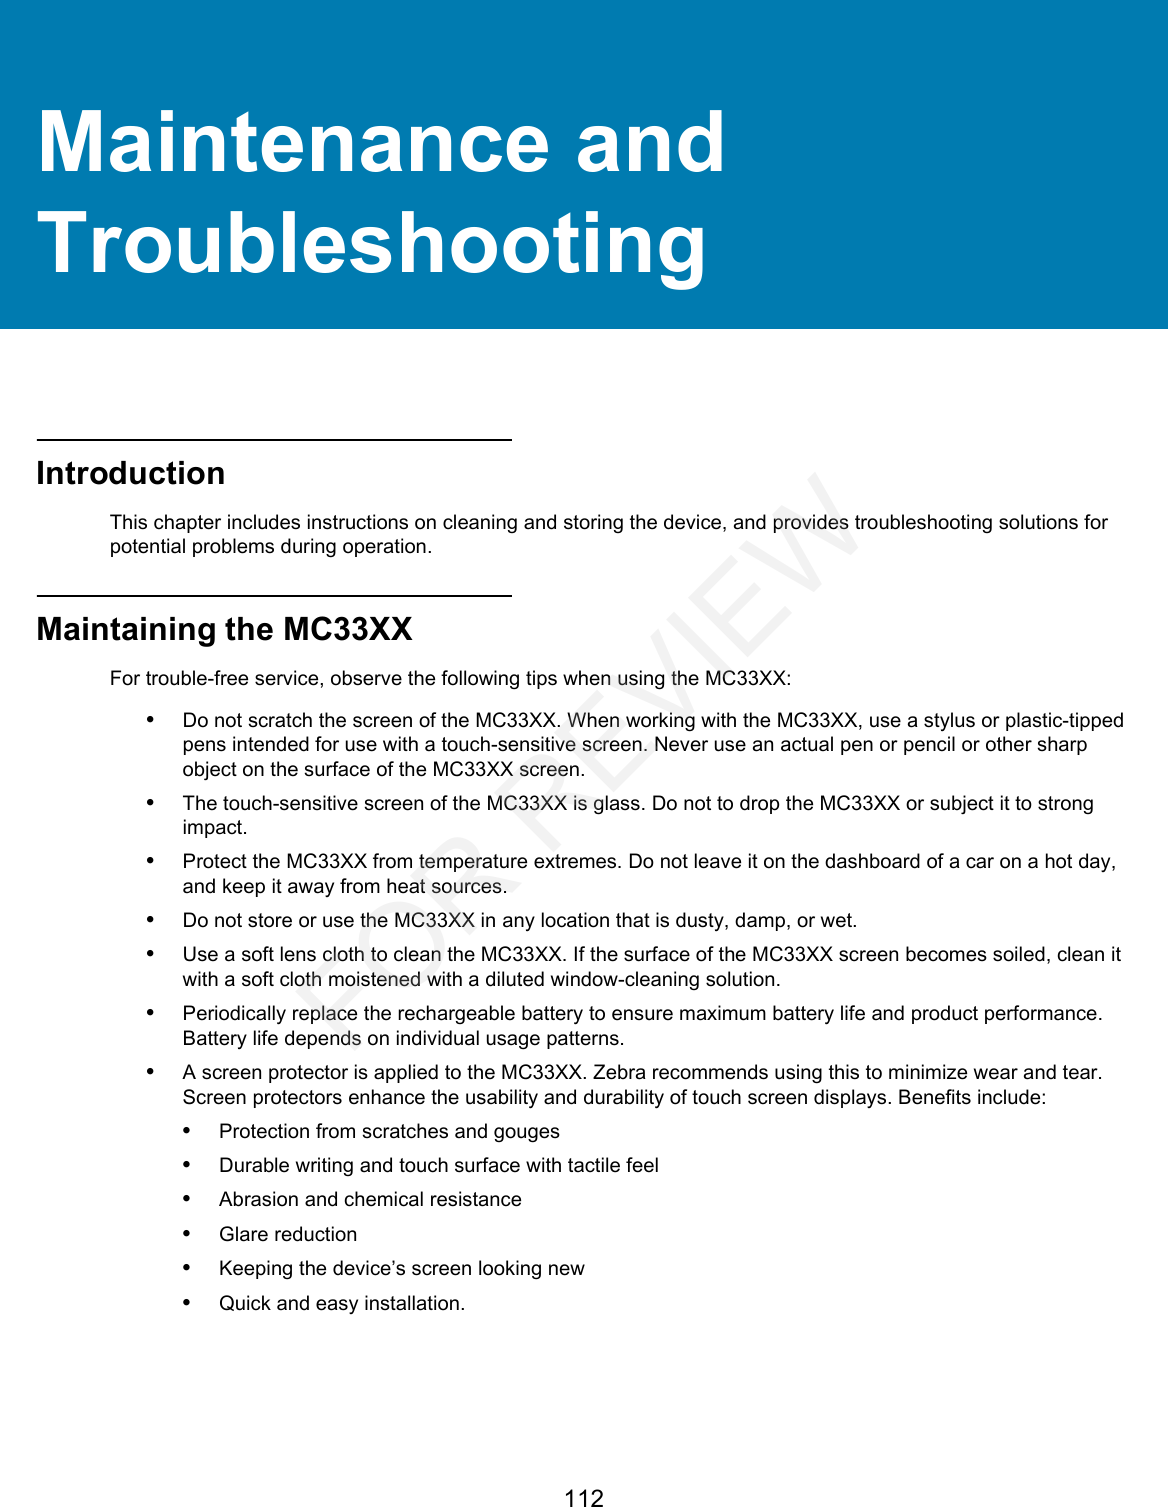 112Maintenance and TroubleshootingIntroductionThis chapter includes instructions on cleaning and storing the device, and provides troubleshooting solutions for potential problems during operation.Maintaining the MC33XXFor trouble-free service, observe the following tips when using the MC33XX:•Do not scratch the screen of the MC33XX. When working with the MC33XX, use a stylus or plastic-tipped pens intended for use with a touch-sensitive screen. Never use an actual pen or pencil or other sharp object on the surface of the MC33XX screen.•The touch-sensitive screen of the MC33XX is glass. Do not to drop the MC33XX or subject it to strong impact.•Protect the MC33XX from temperature extremes. Do not leave it on the dashboard of a car on a hot day, and keep it away from heat sources.•Do not store or use the MC33XX in any location that is dusty, damp, or wet.•Use a soft lens cloth to clean the MC33XX. If the surface of the MC33XX screen becomes soiled, clean it with a soft cloth moistened with a diluted window-cleaning solution.•Periodically replace the rechargeable battery to ensure maximum battery life and product performance. Battery life depends on individual usage patterns.•A screen protector is applied to the MC33XX. Zebra recommends using this to minimize wear and tear. Screen protectors enhance the usability and durability of touch screen displays. Benefits include:•Protection from scratches and gouges•Durable writing and touch surface with tactile feel•Abrasion and chemical resistance•Glare reduction•Keeping the device’s screen looking new•Quick and easy installation.FOR REVIEW